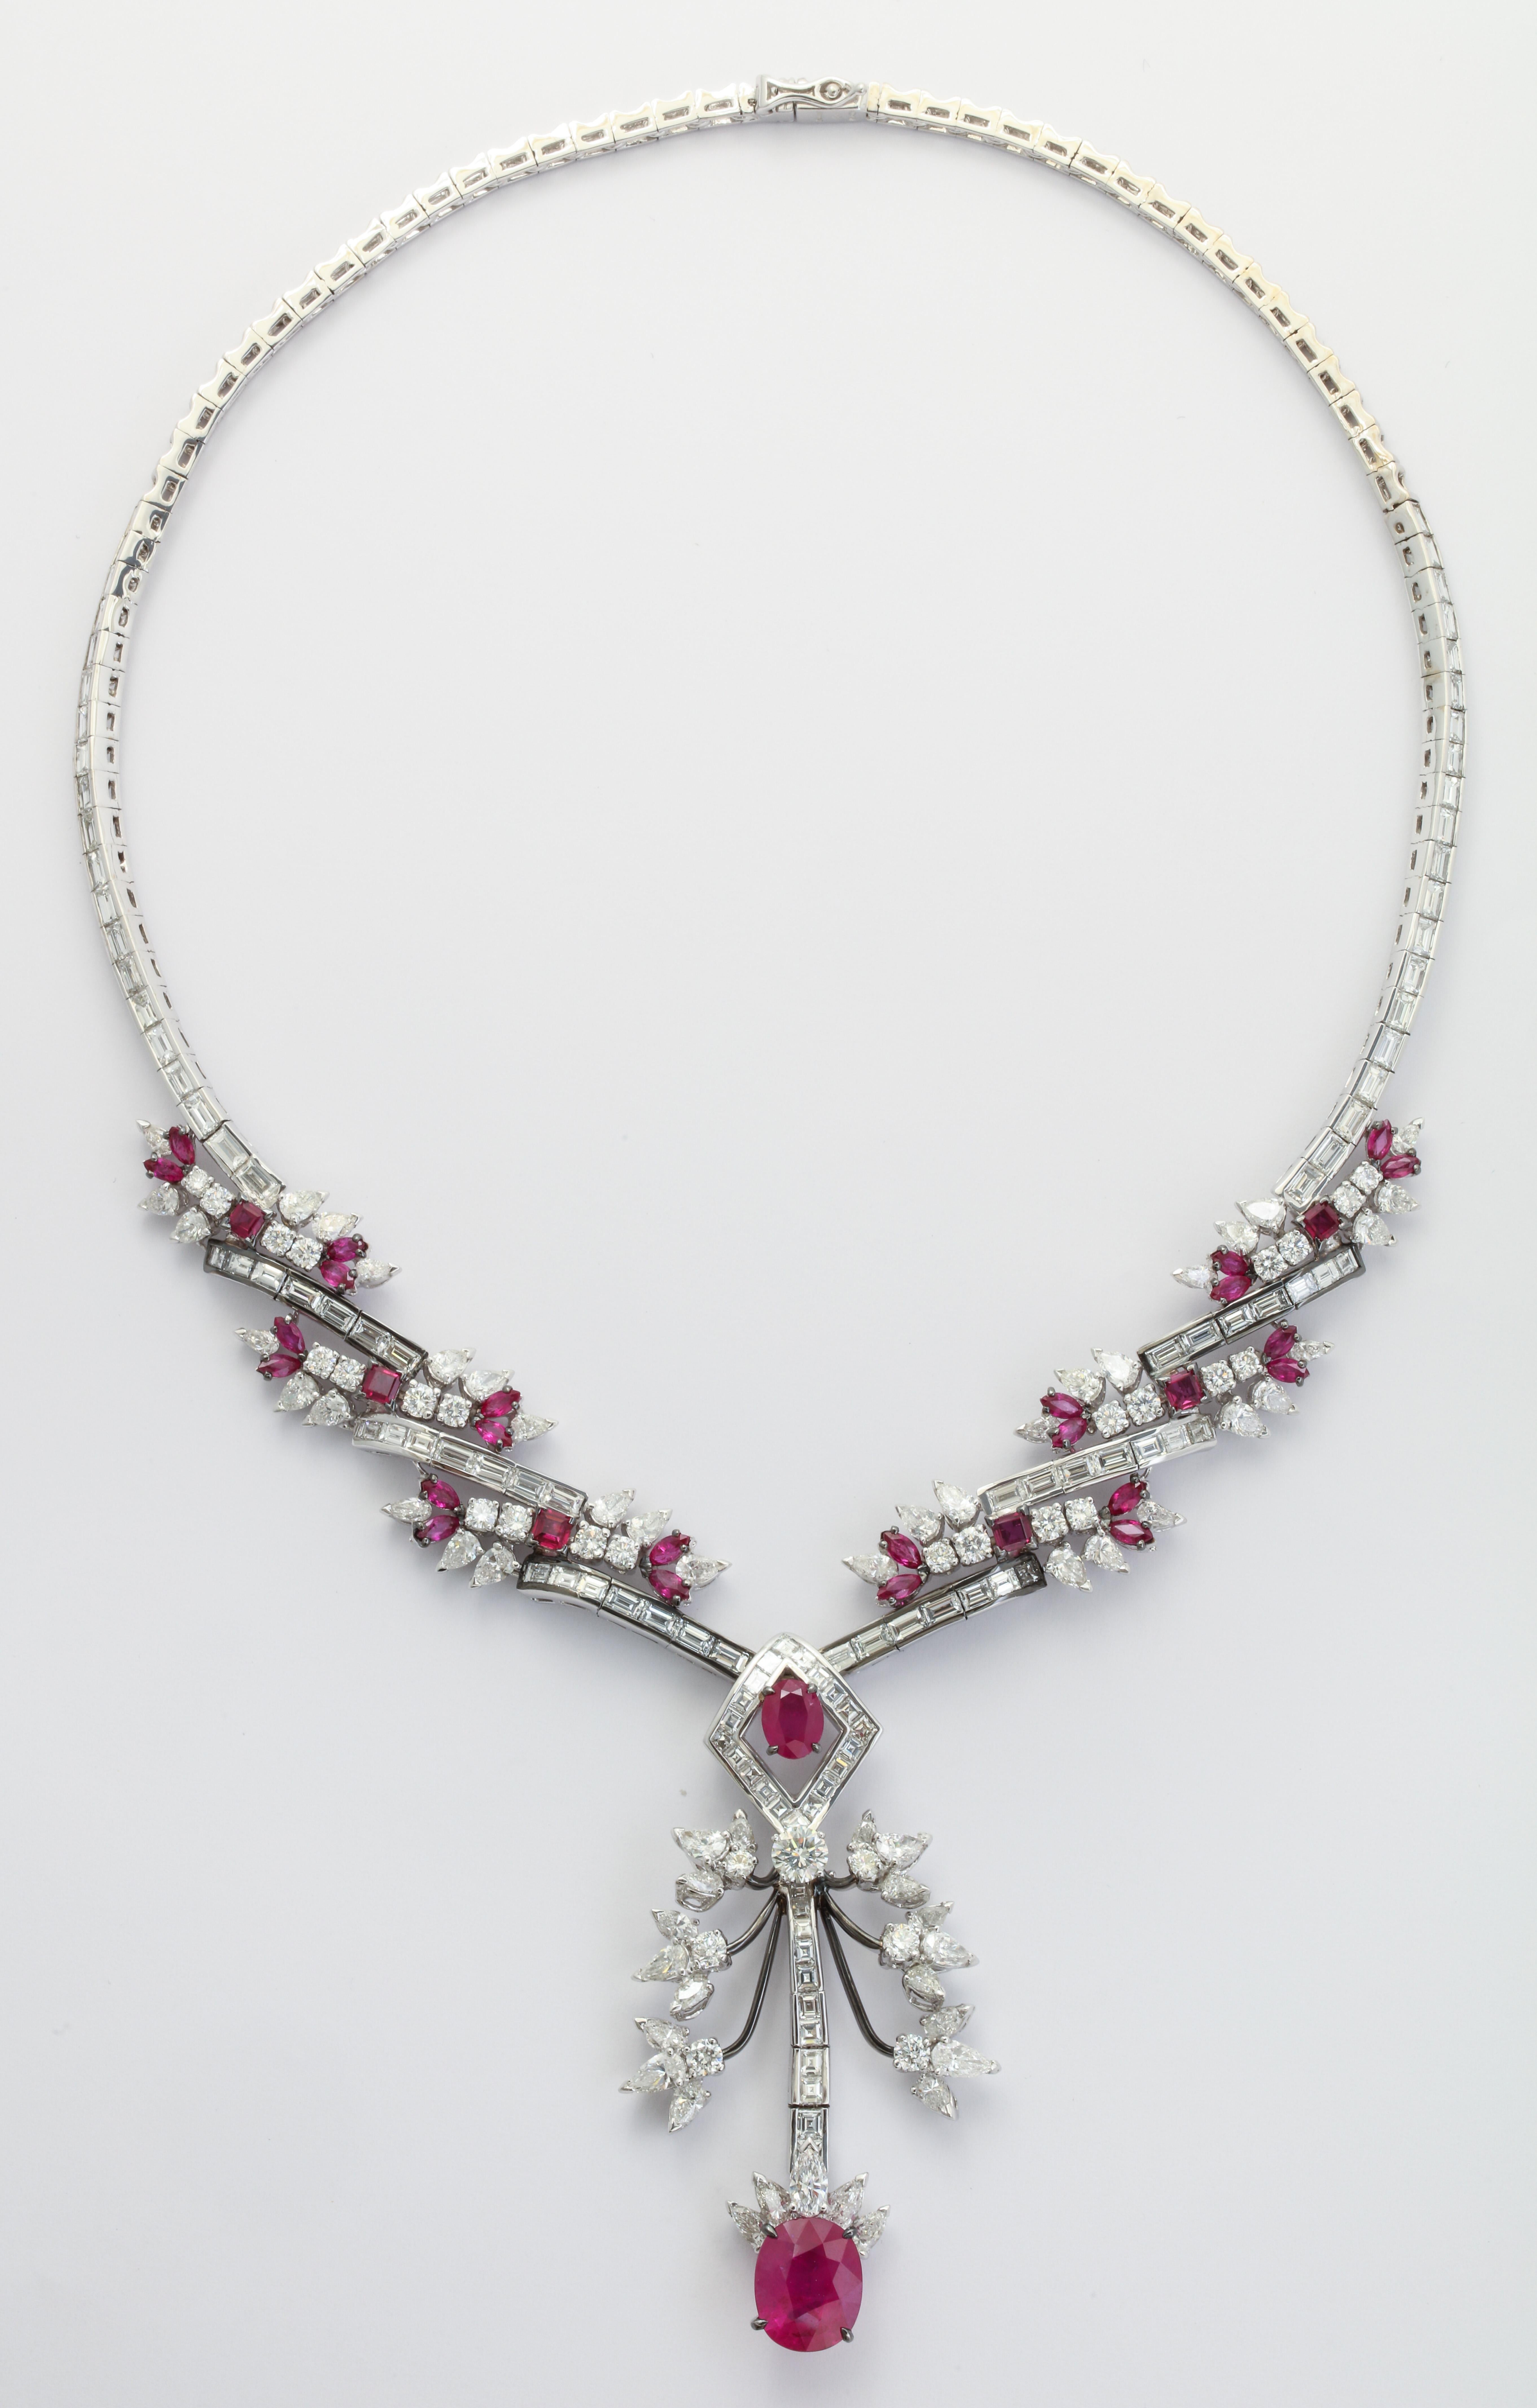 The highly important complete set features a necklace with detachable pendant, a flexible bracelet, hanging earrings and a ring.  Each of the pieces is set with numerous rubies and diamonds and features at least one larger, central, ruby.  The suite